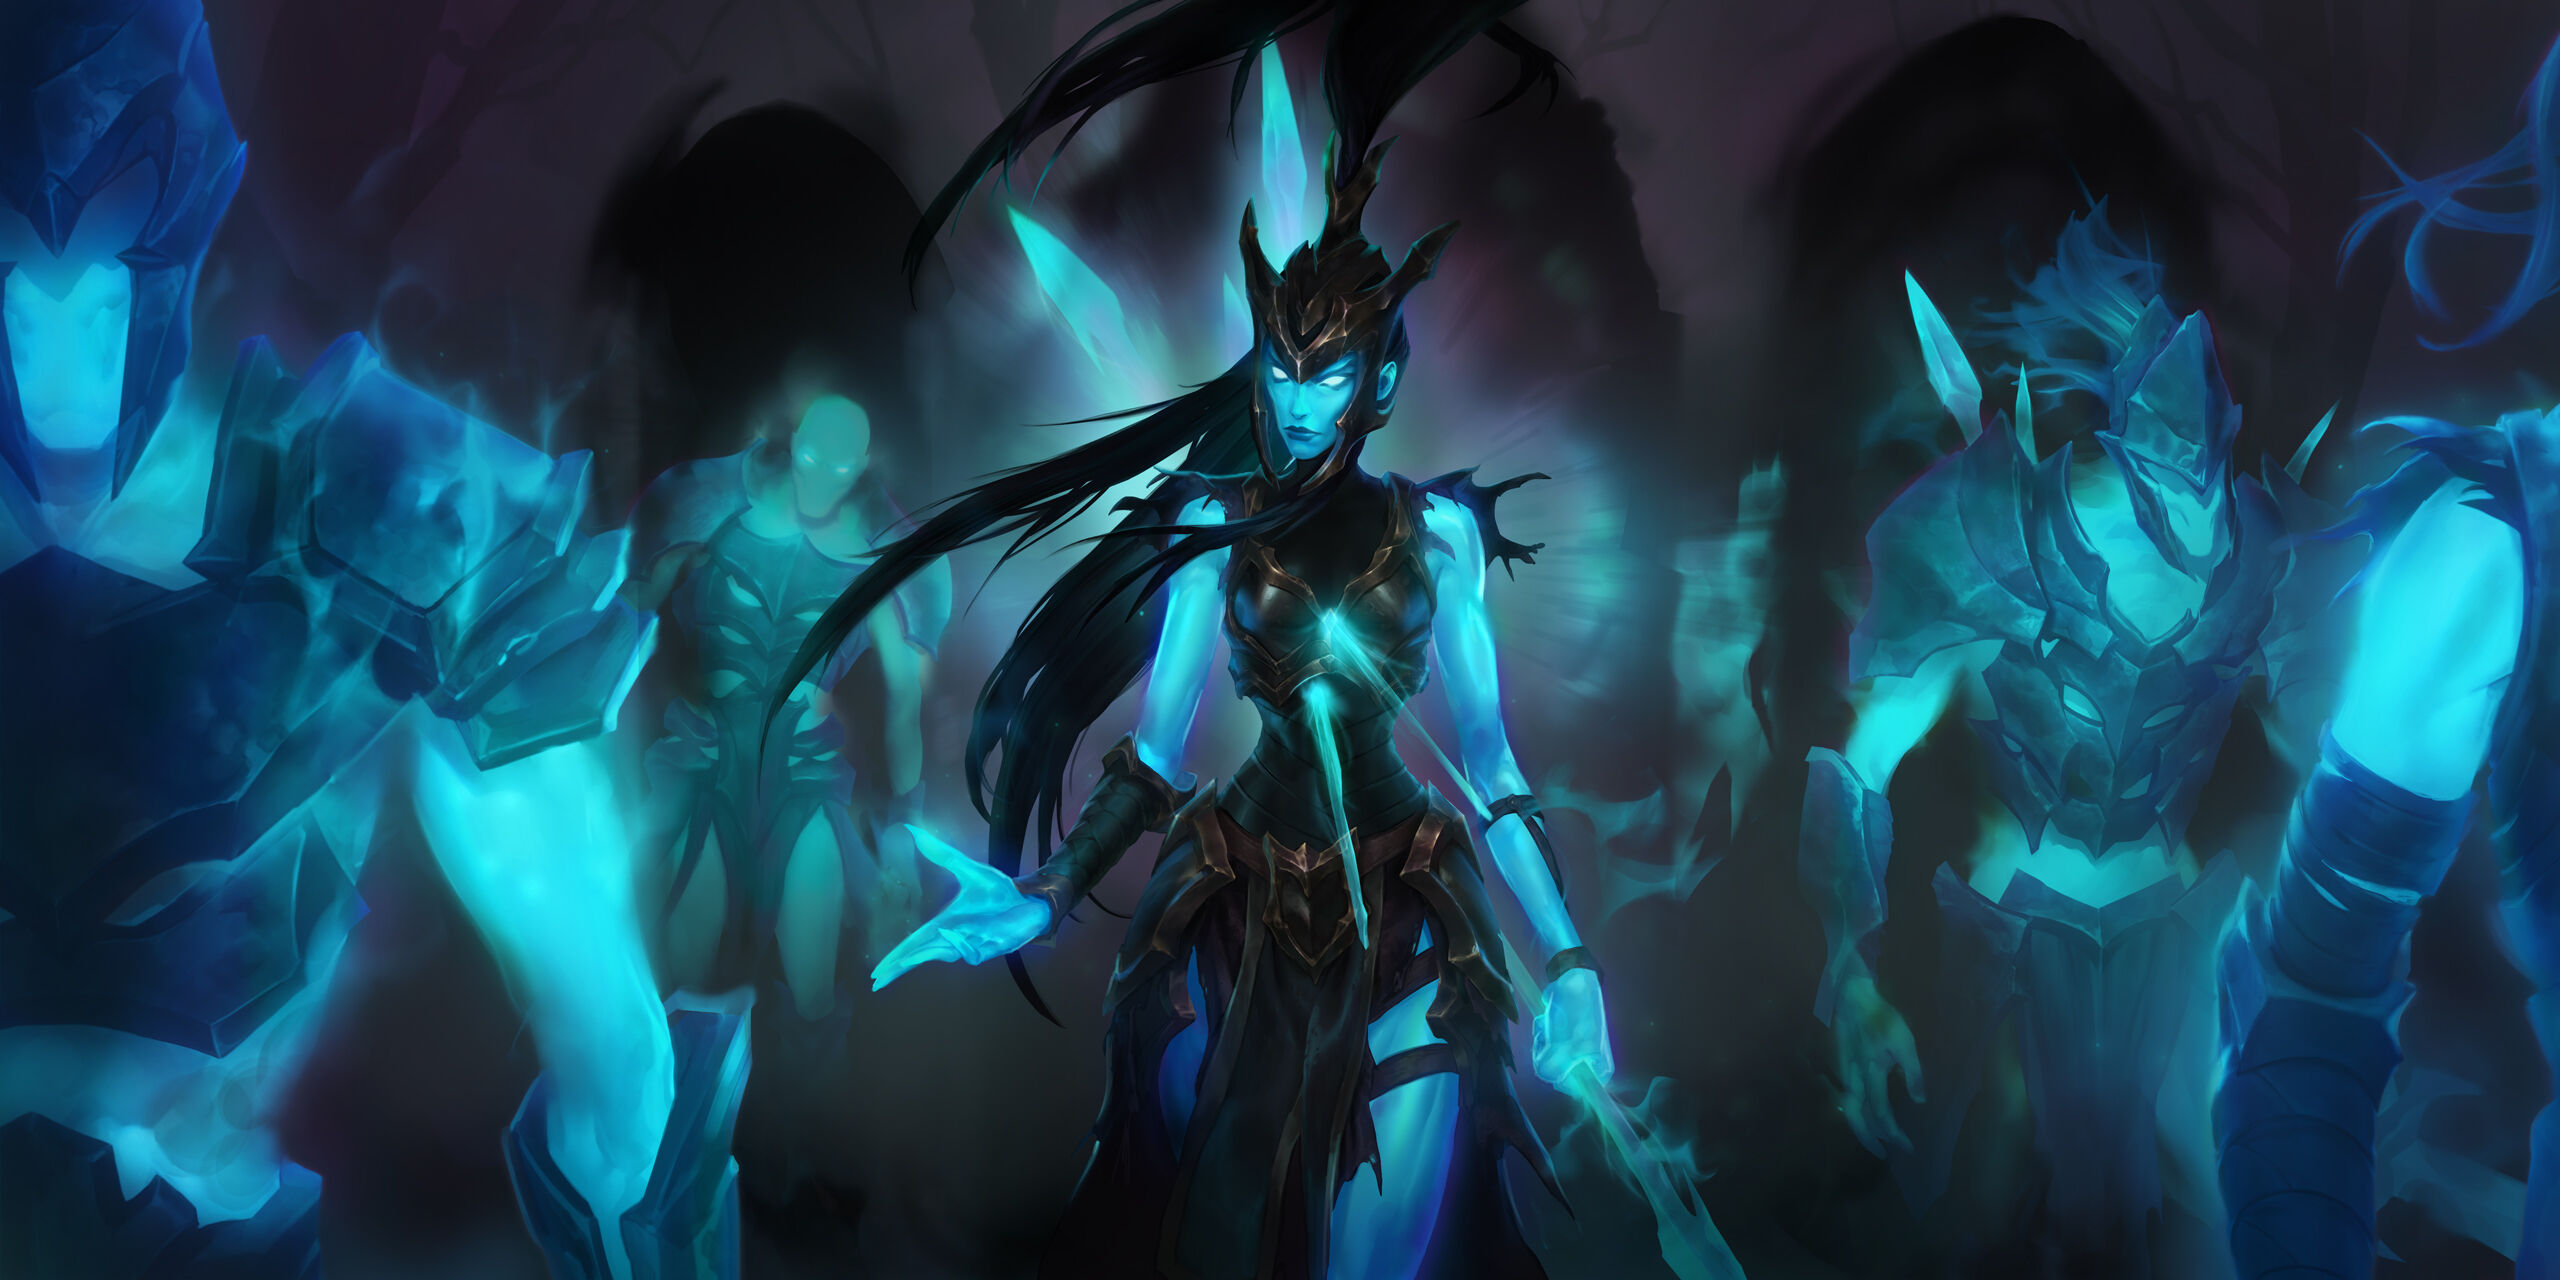 Sorry Riot, but the new League of Legends Summoner's Cup ain't it